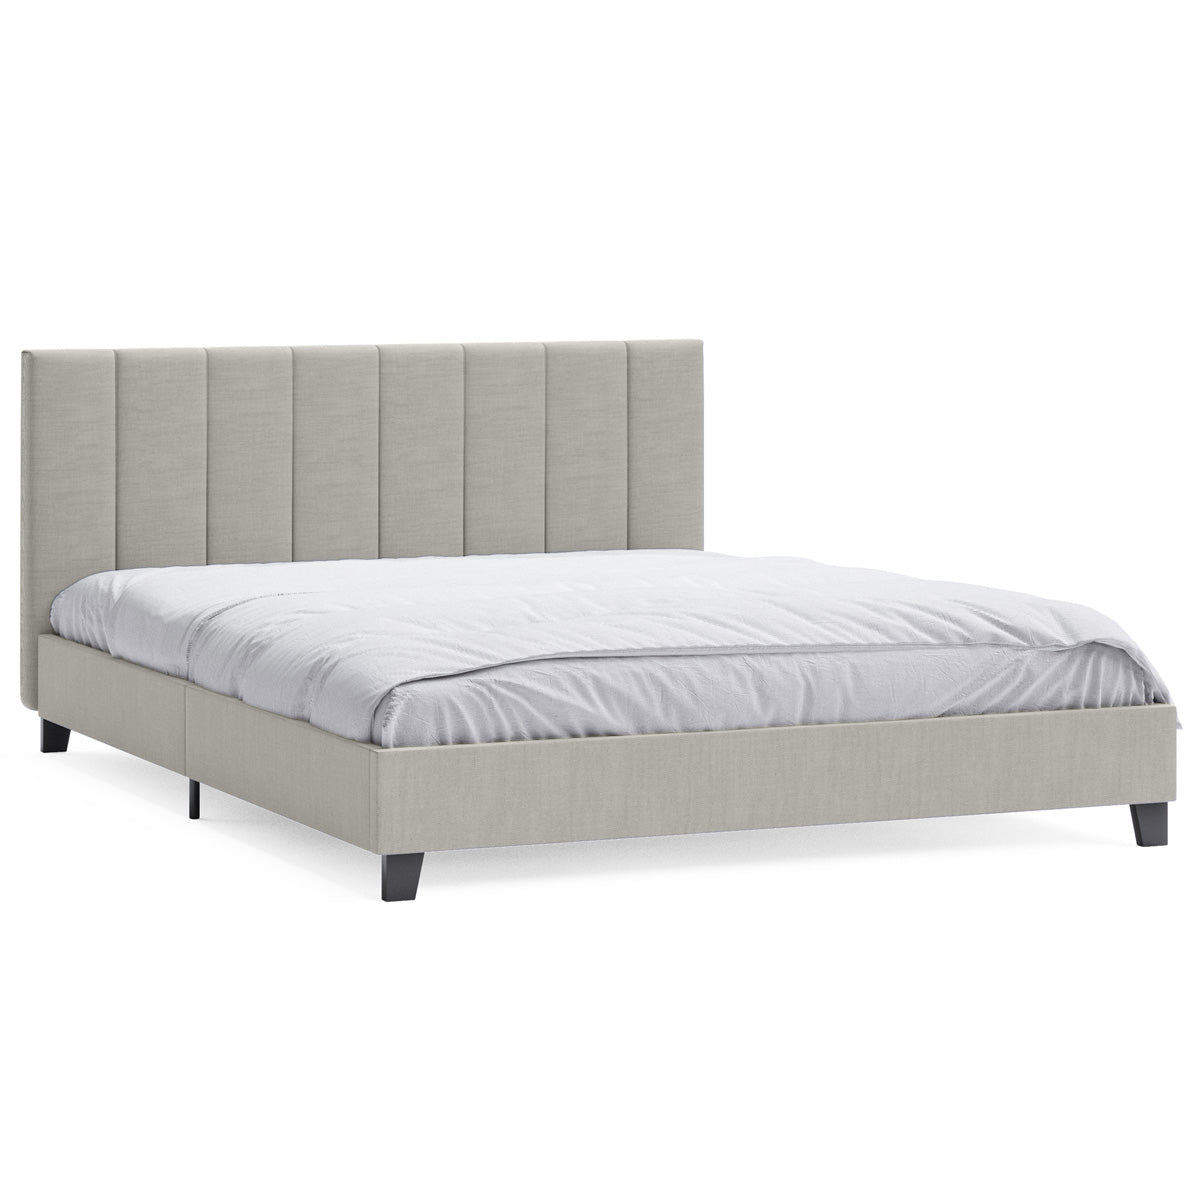 Ormond Fabric Bed Frame (Natural Beige)